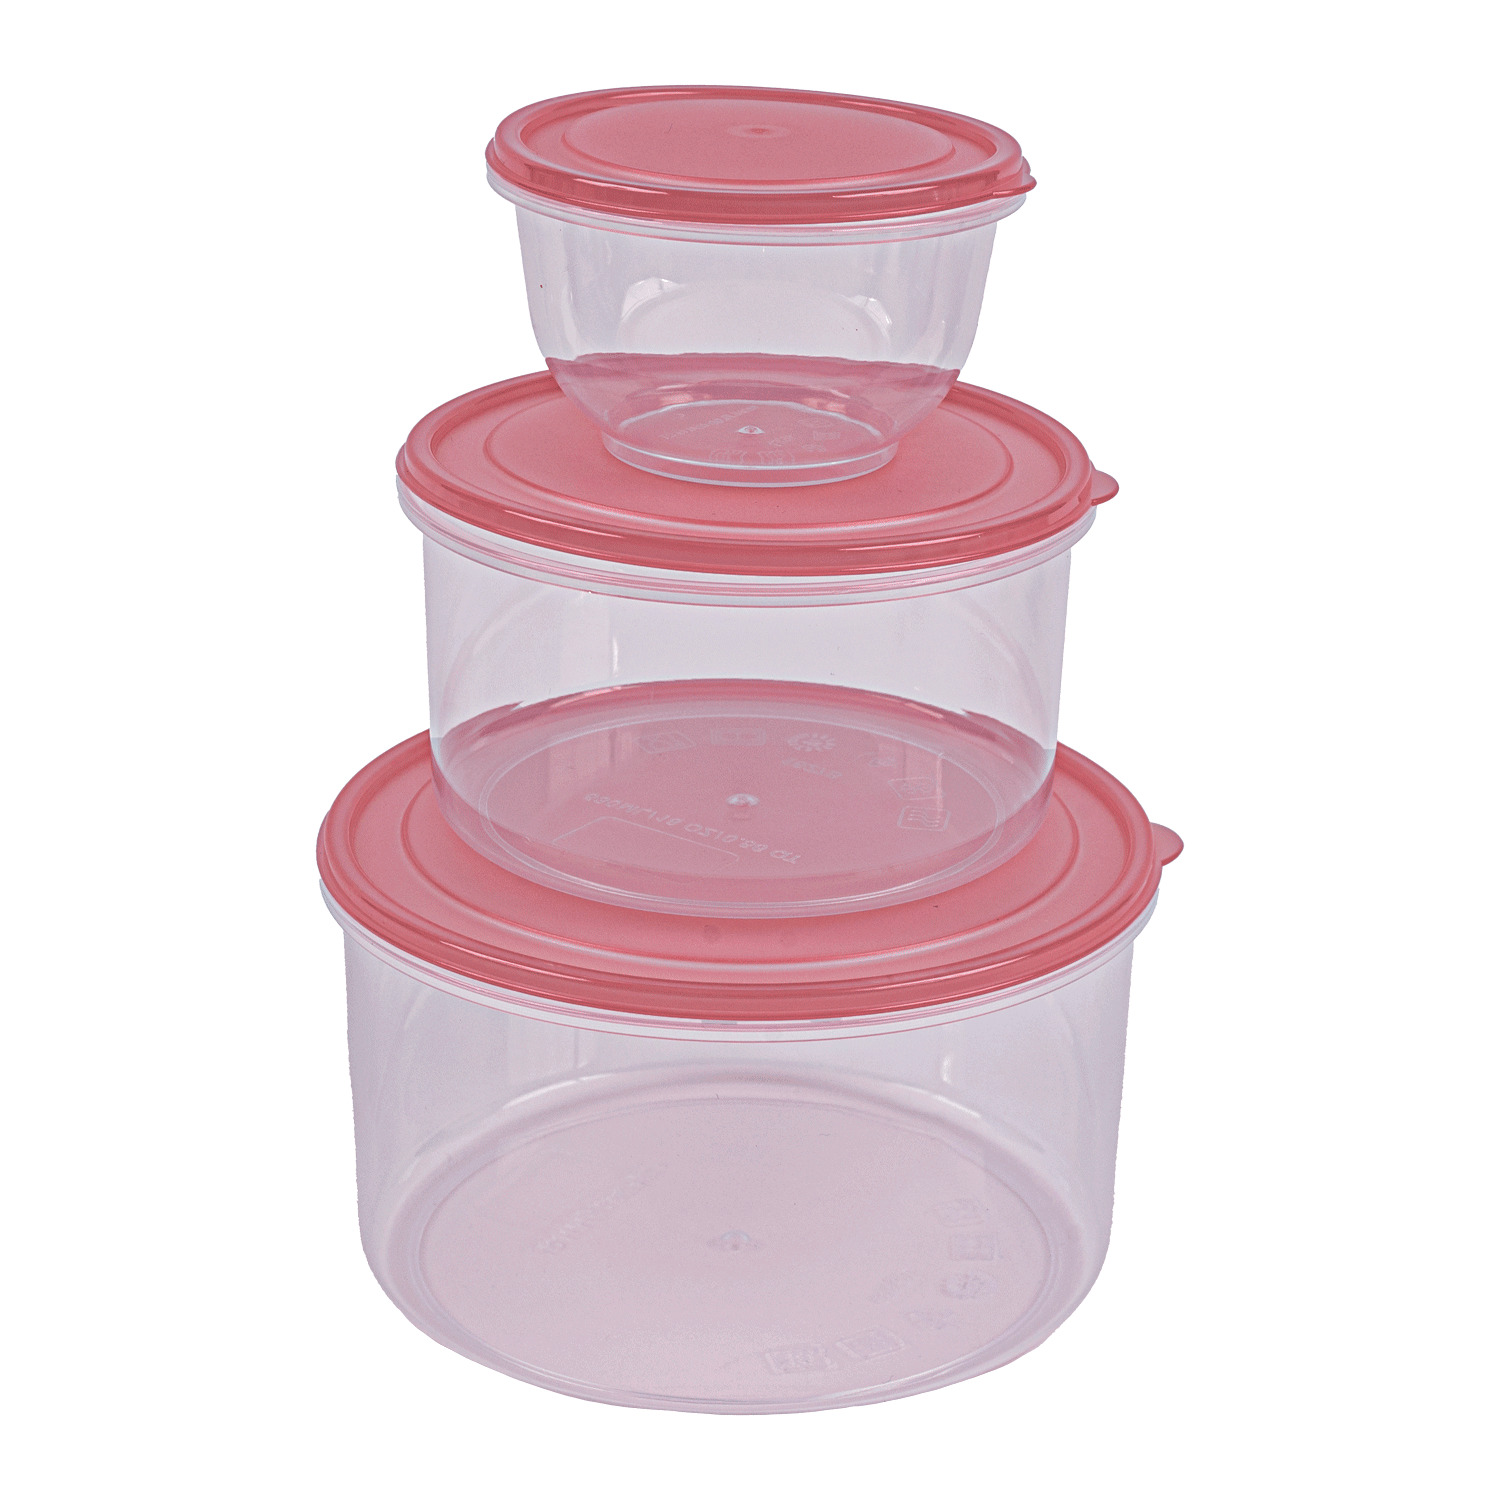 Round nesting food containers, pk. of 3 - 180ml, 530ml, 1.05L